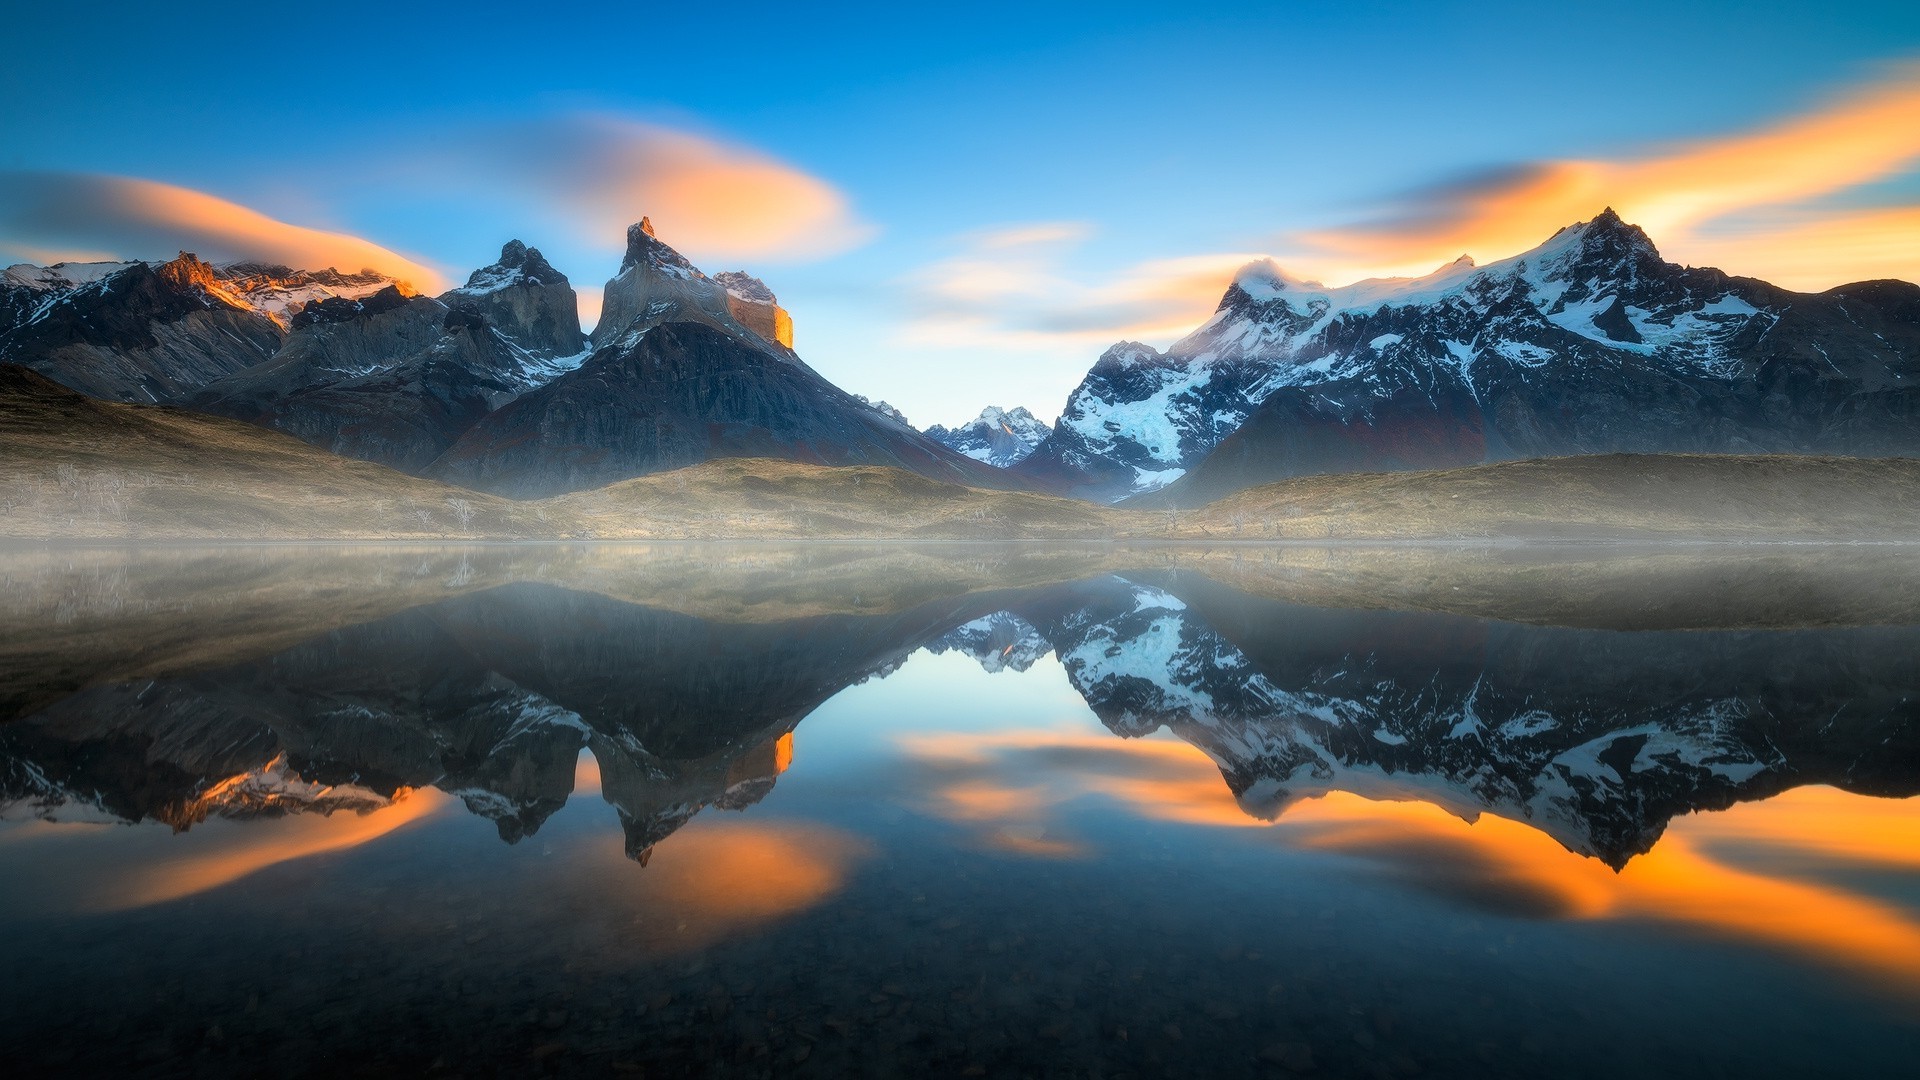 nature, Mist, Landscape, Sunset, Mountain, Lake, Reflection, Torres Del Paine, Chile, Water, Snowy Peak, Clouds Wallpaper